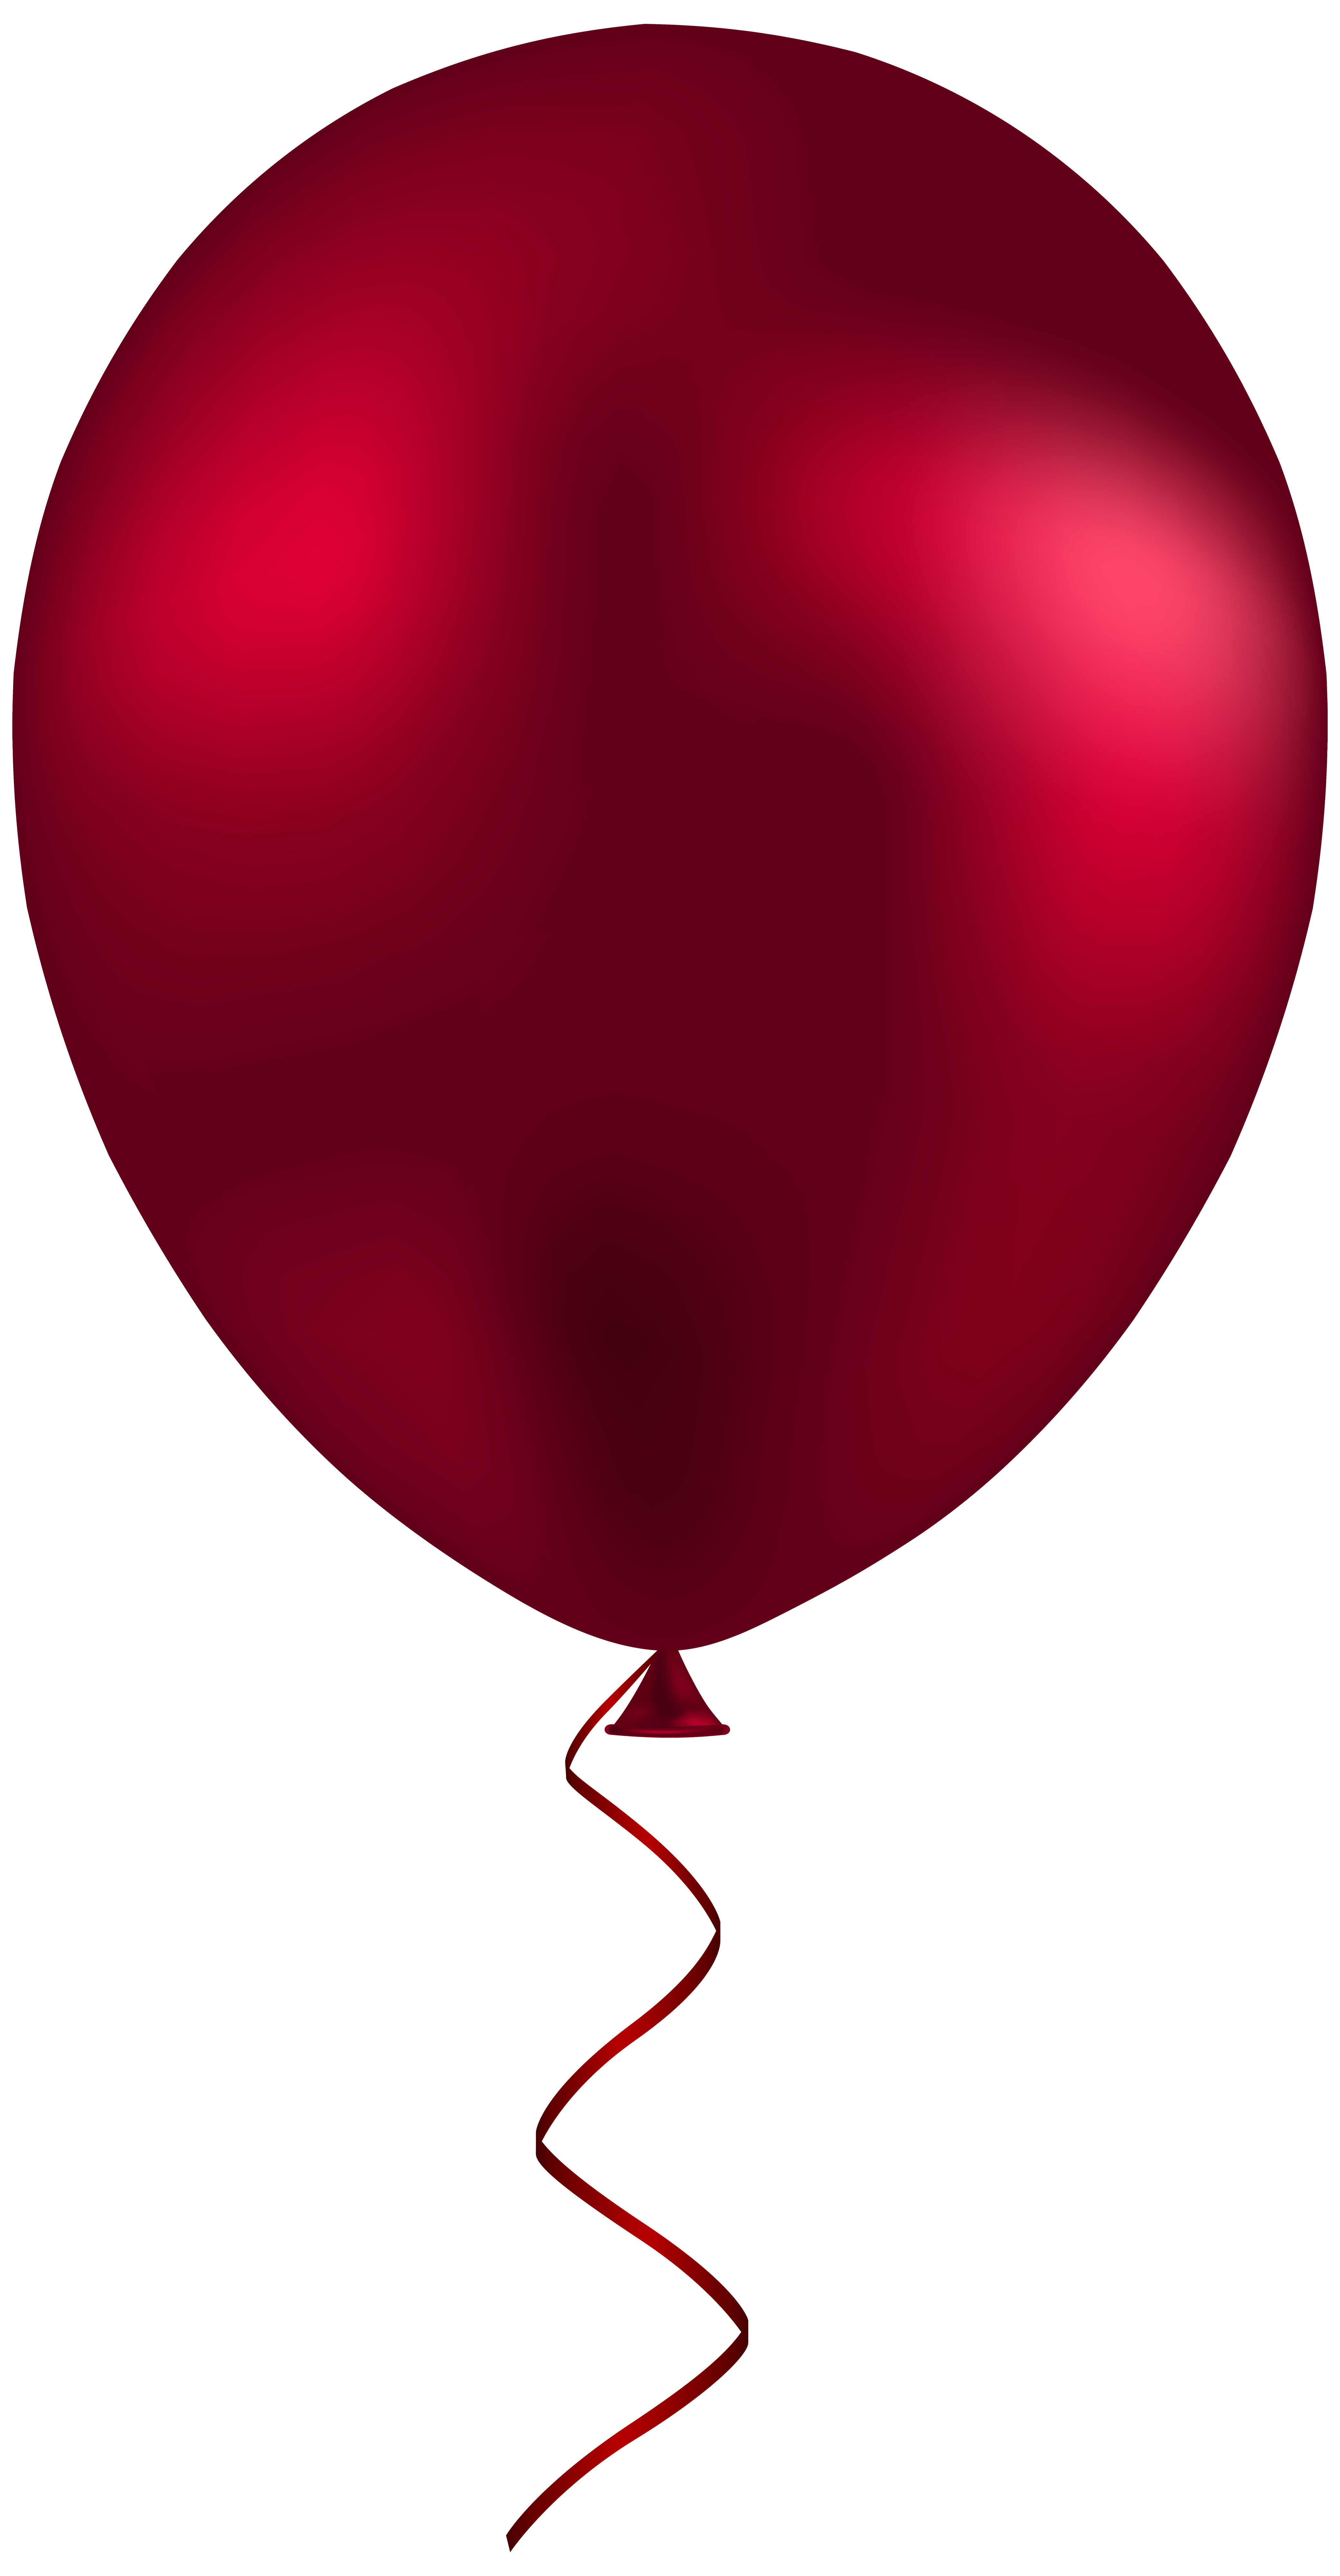 Red Balloon 